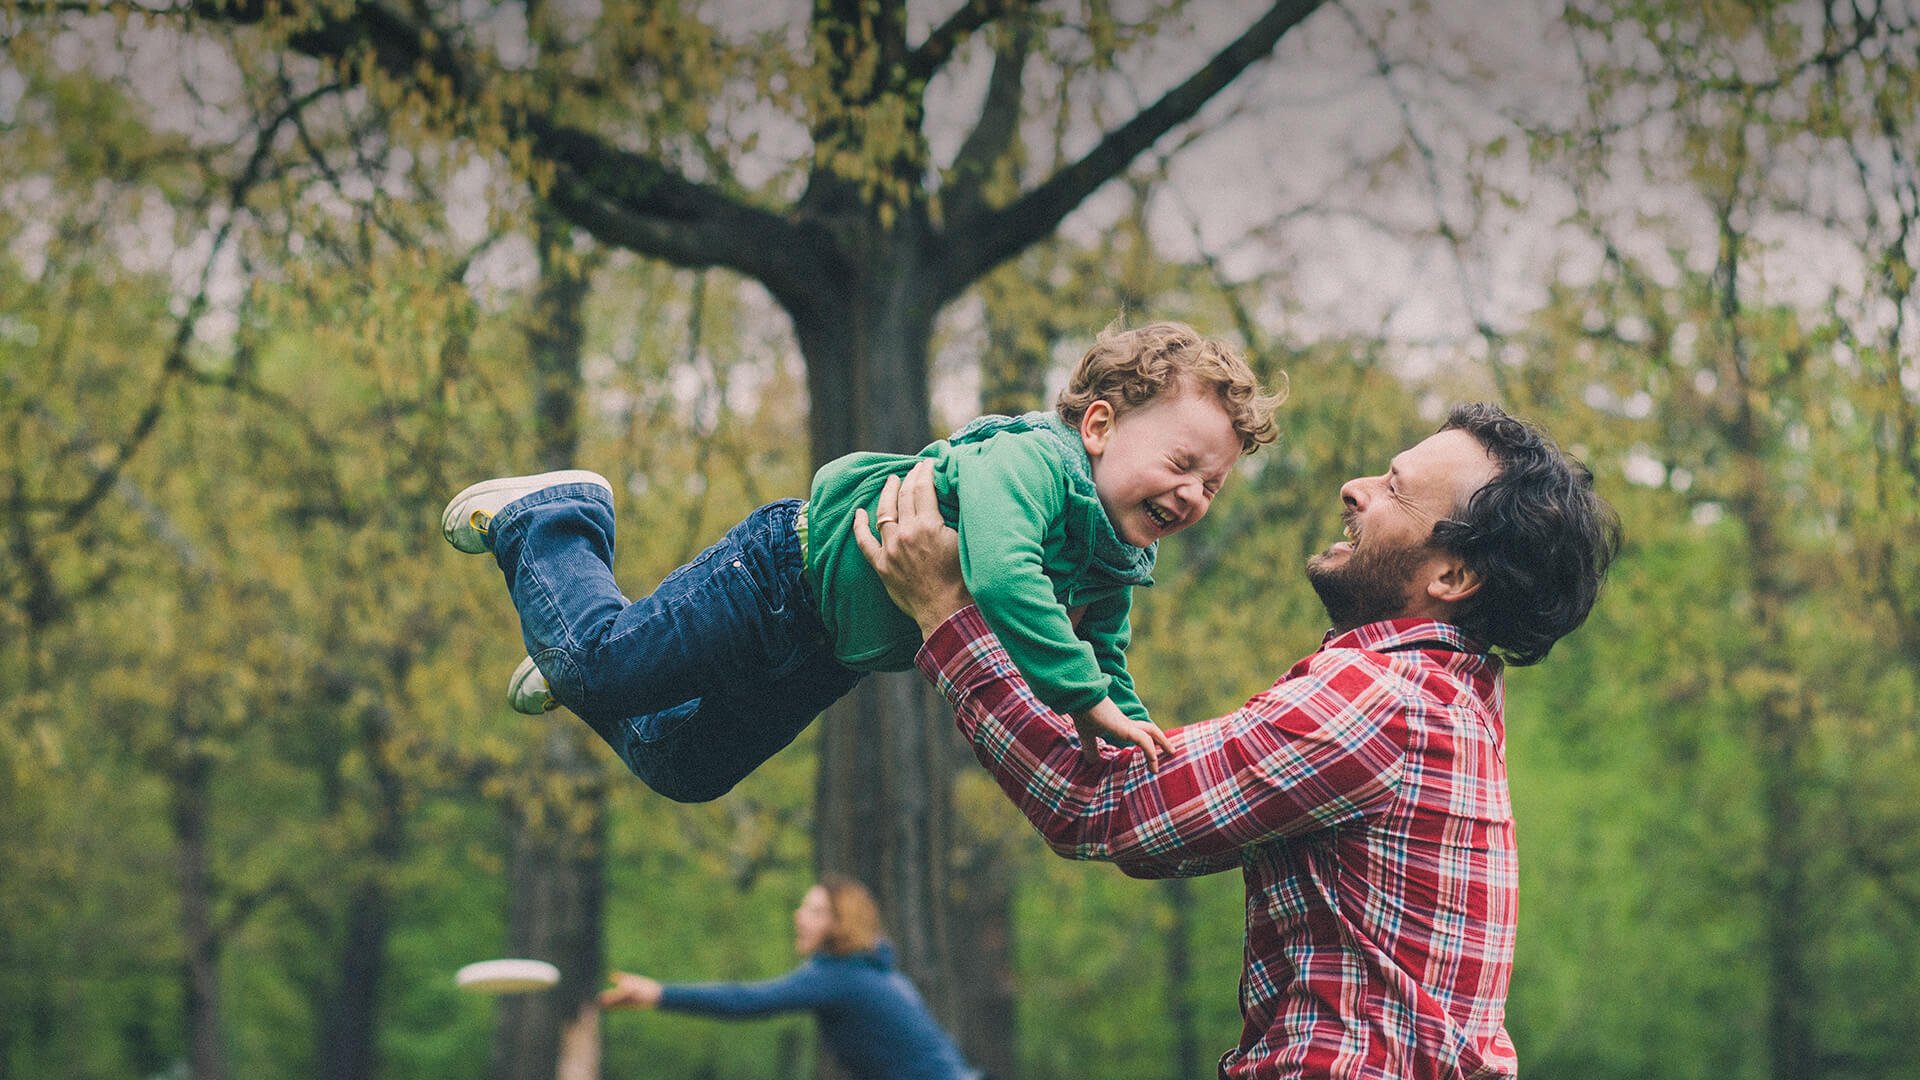 Single parent dating symbolized by a single dad who is tossing his little son in the air on a playground in Australia